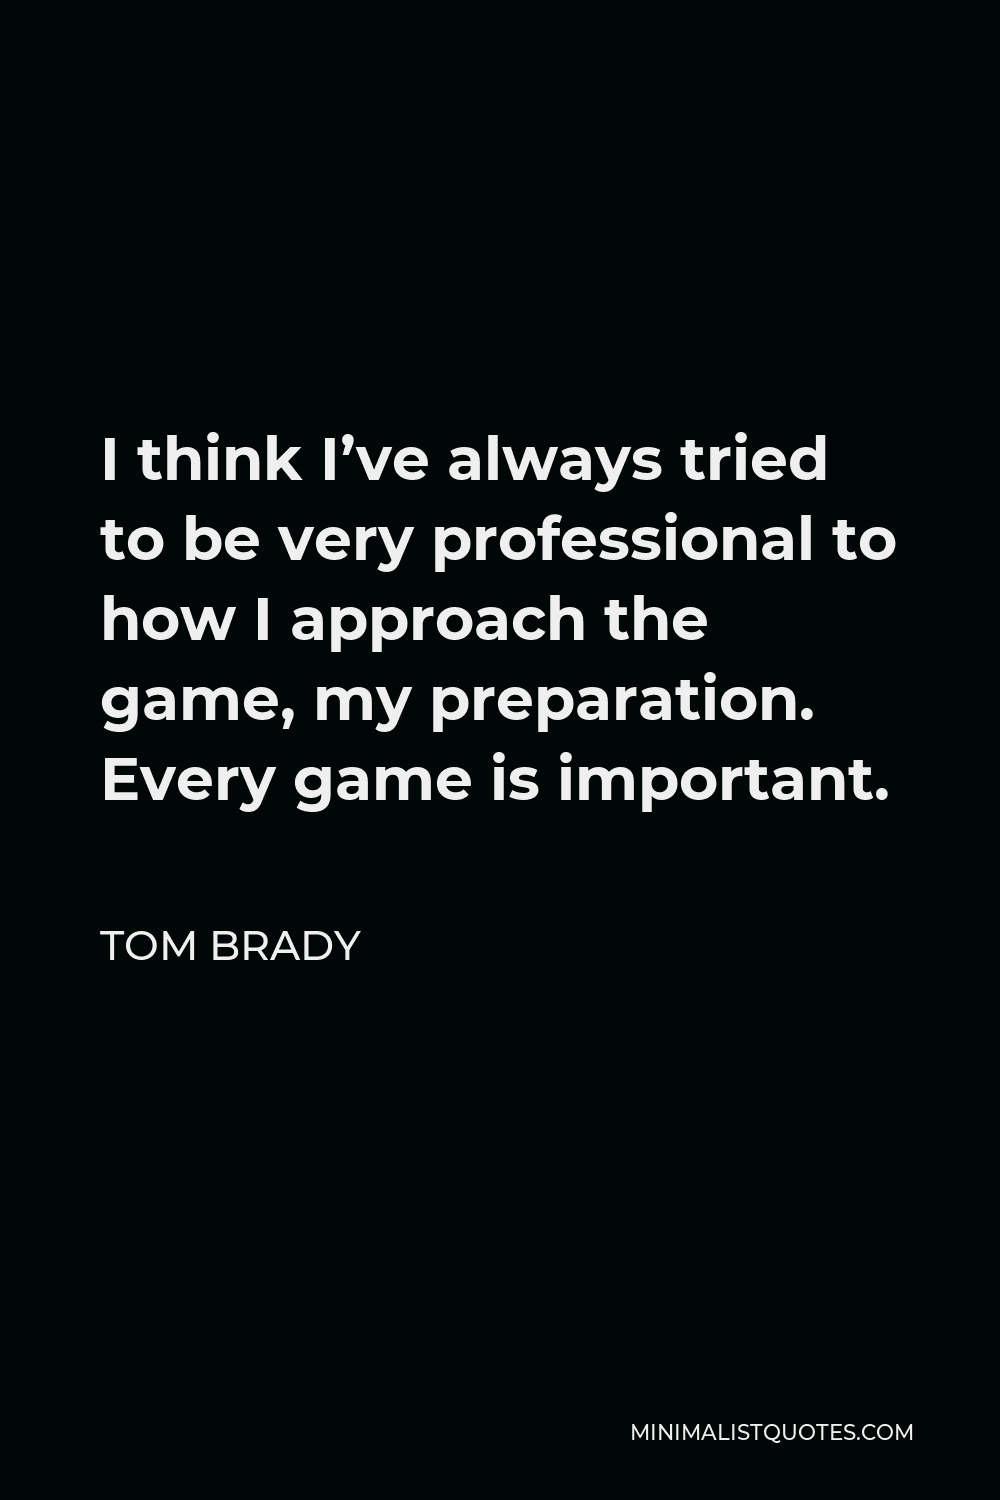 Tom Brady Quote - I think I’ve always tried to be very professional to how I approach the game, my preparation. Every game is important.